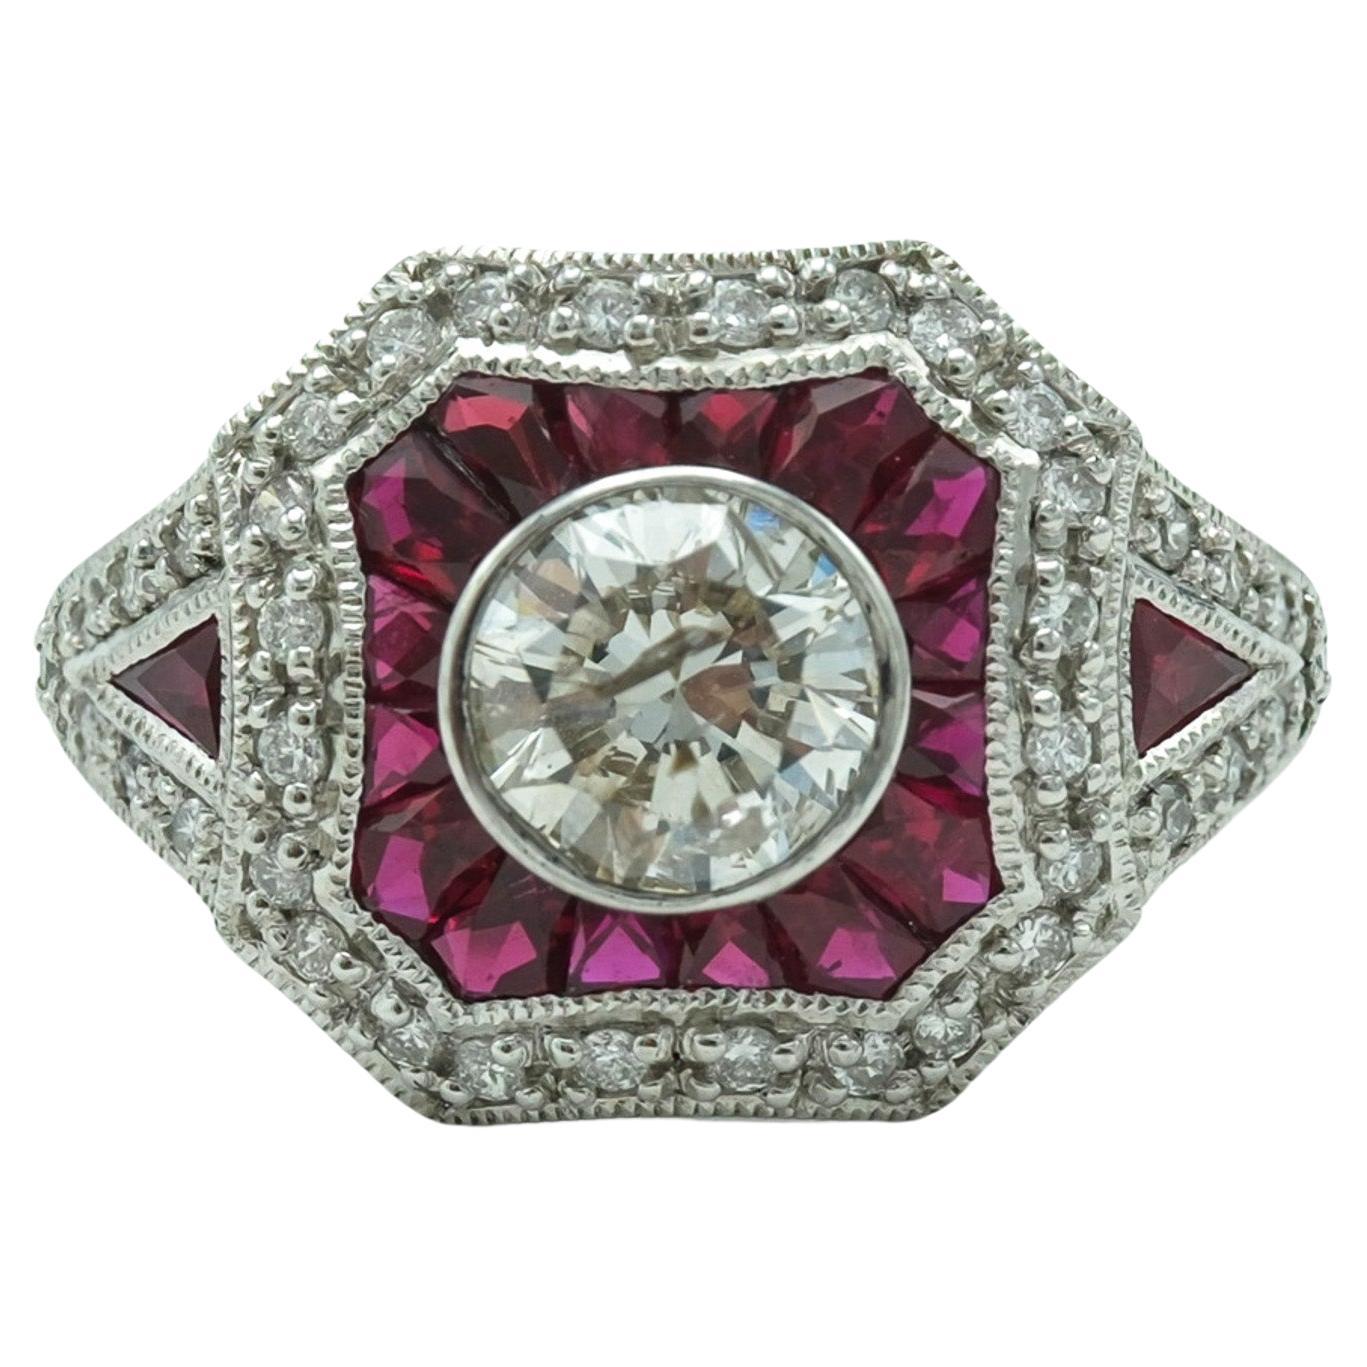 Platinum Ruby and Diamond Ring with Baguette Cut Rubies and Round Diamonds